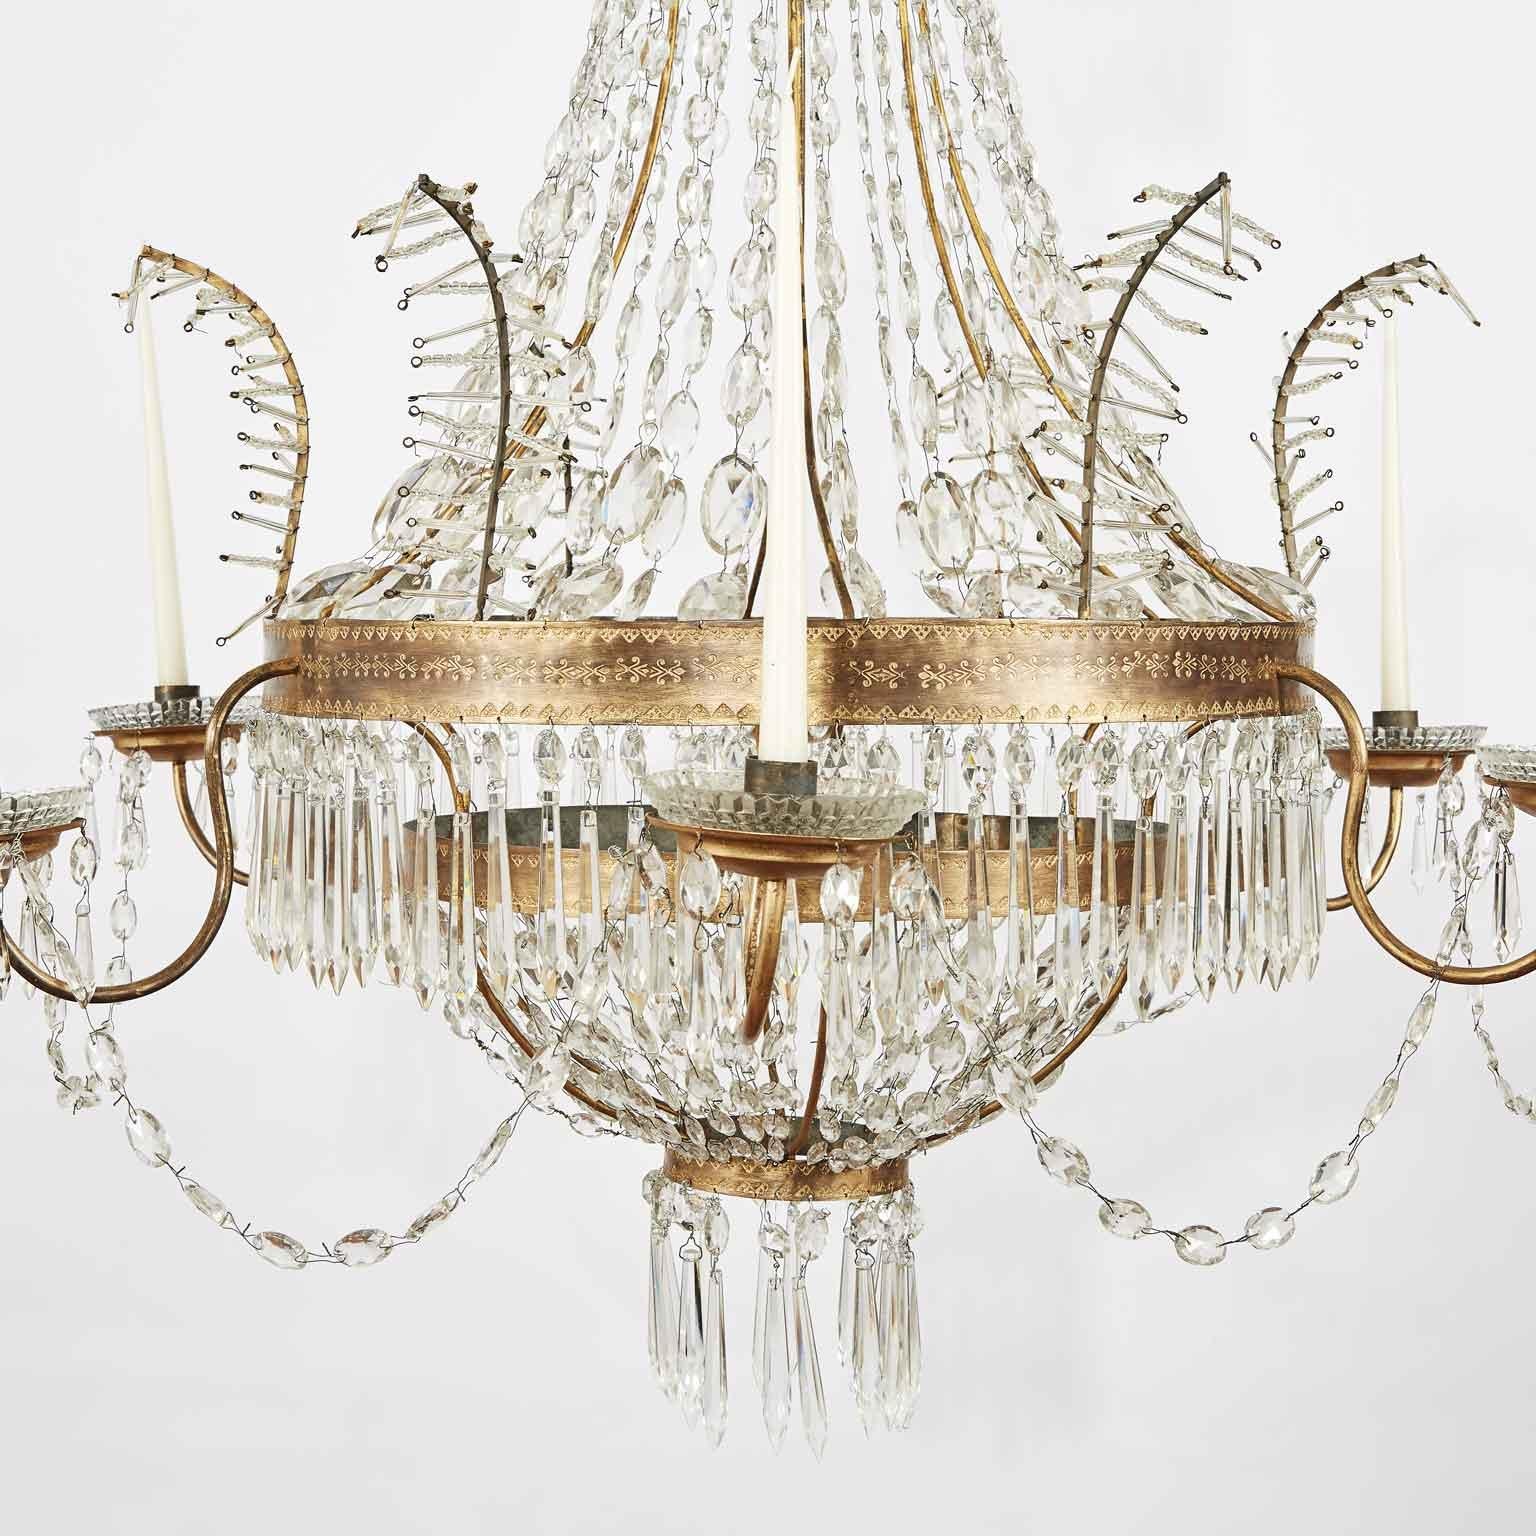 Antique original Empire six-light beaded crystal chandelier, dating back to late 18th century, of Italian origin, coming from a Piedmontese private palazzo. The hand-made circular structure consists of an Empire classical drop-shaped frame topped by